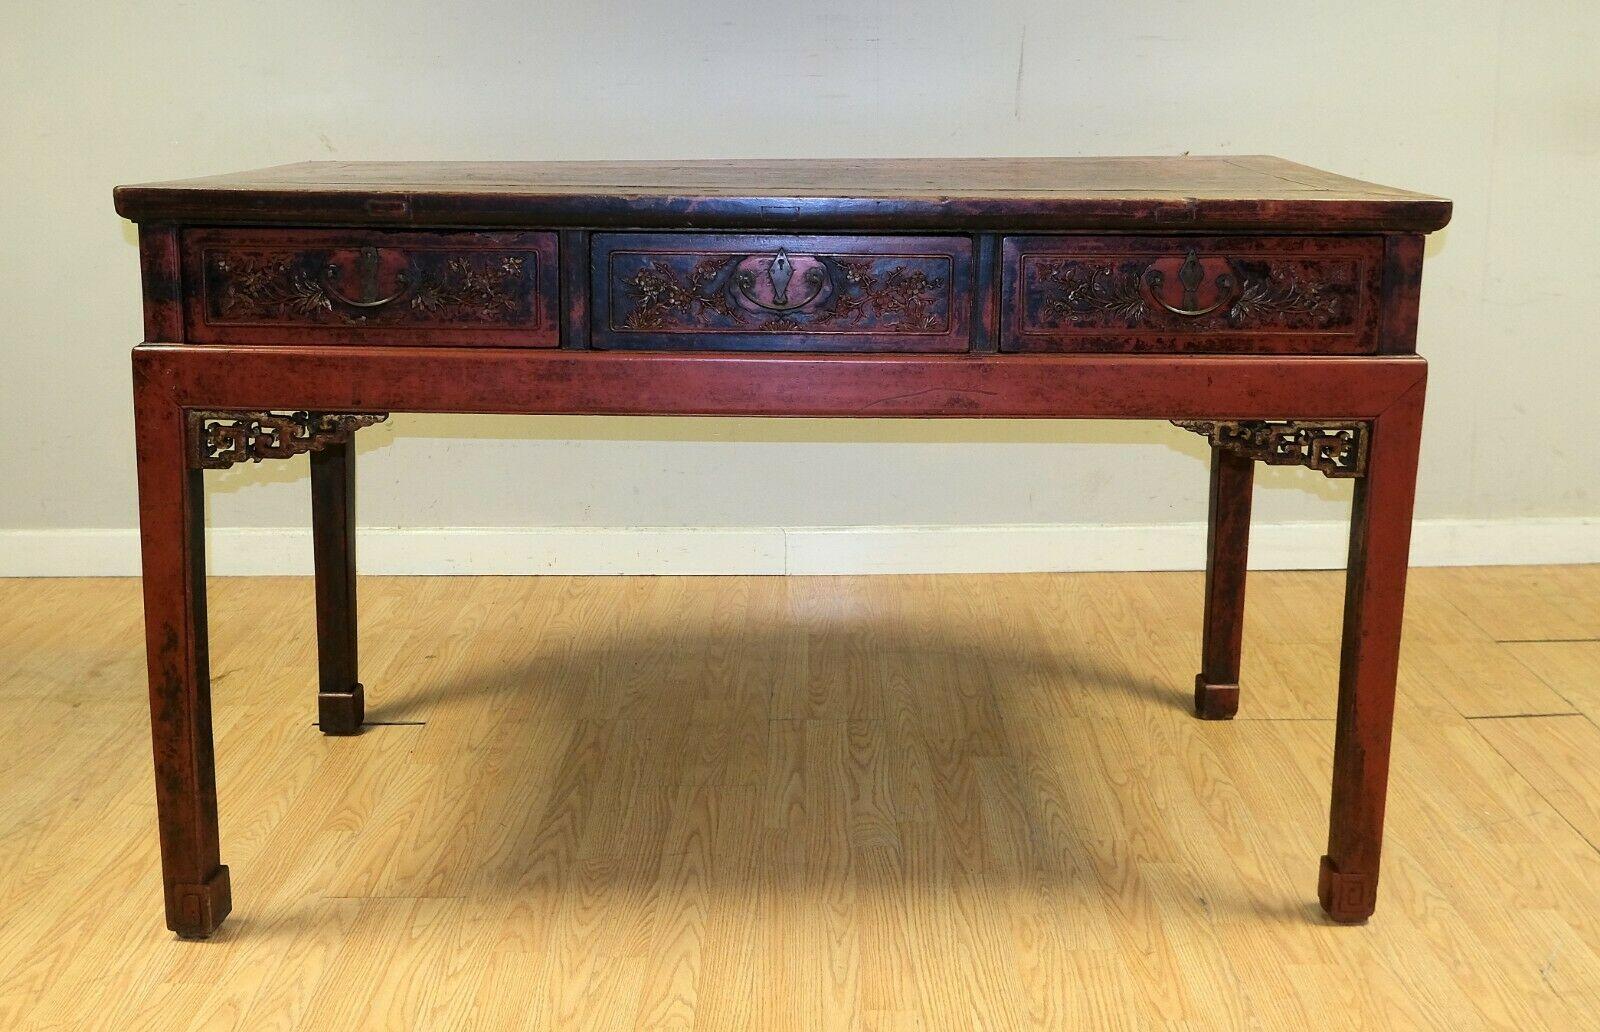 We are delighted to offer for sale this exquisite late 19th Century Chinese Chippendale style console table with three good size drawers.

This elegant and lovely red lacquered console table is standing on hoof feet, as well as it's presented with